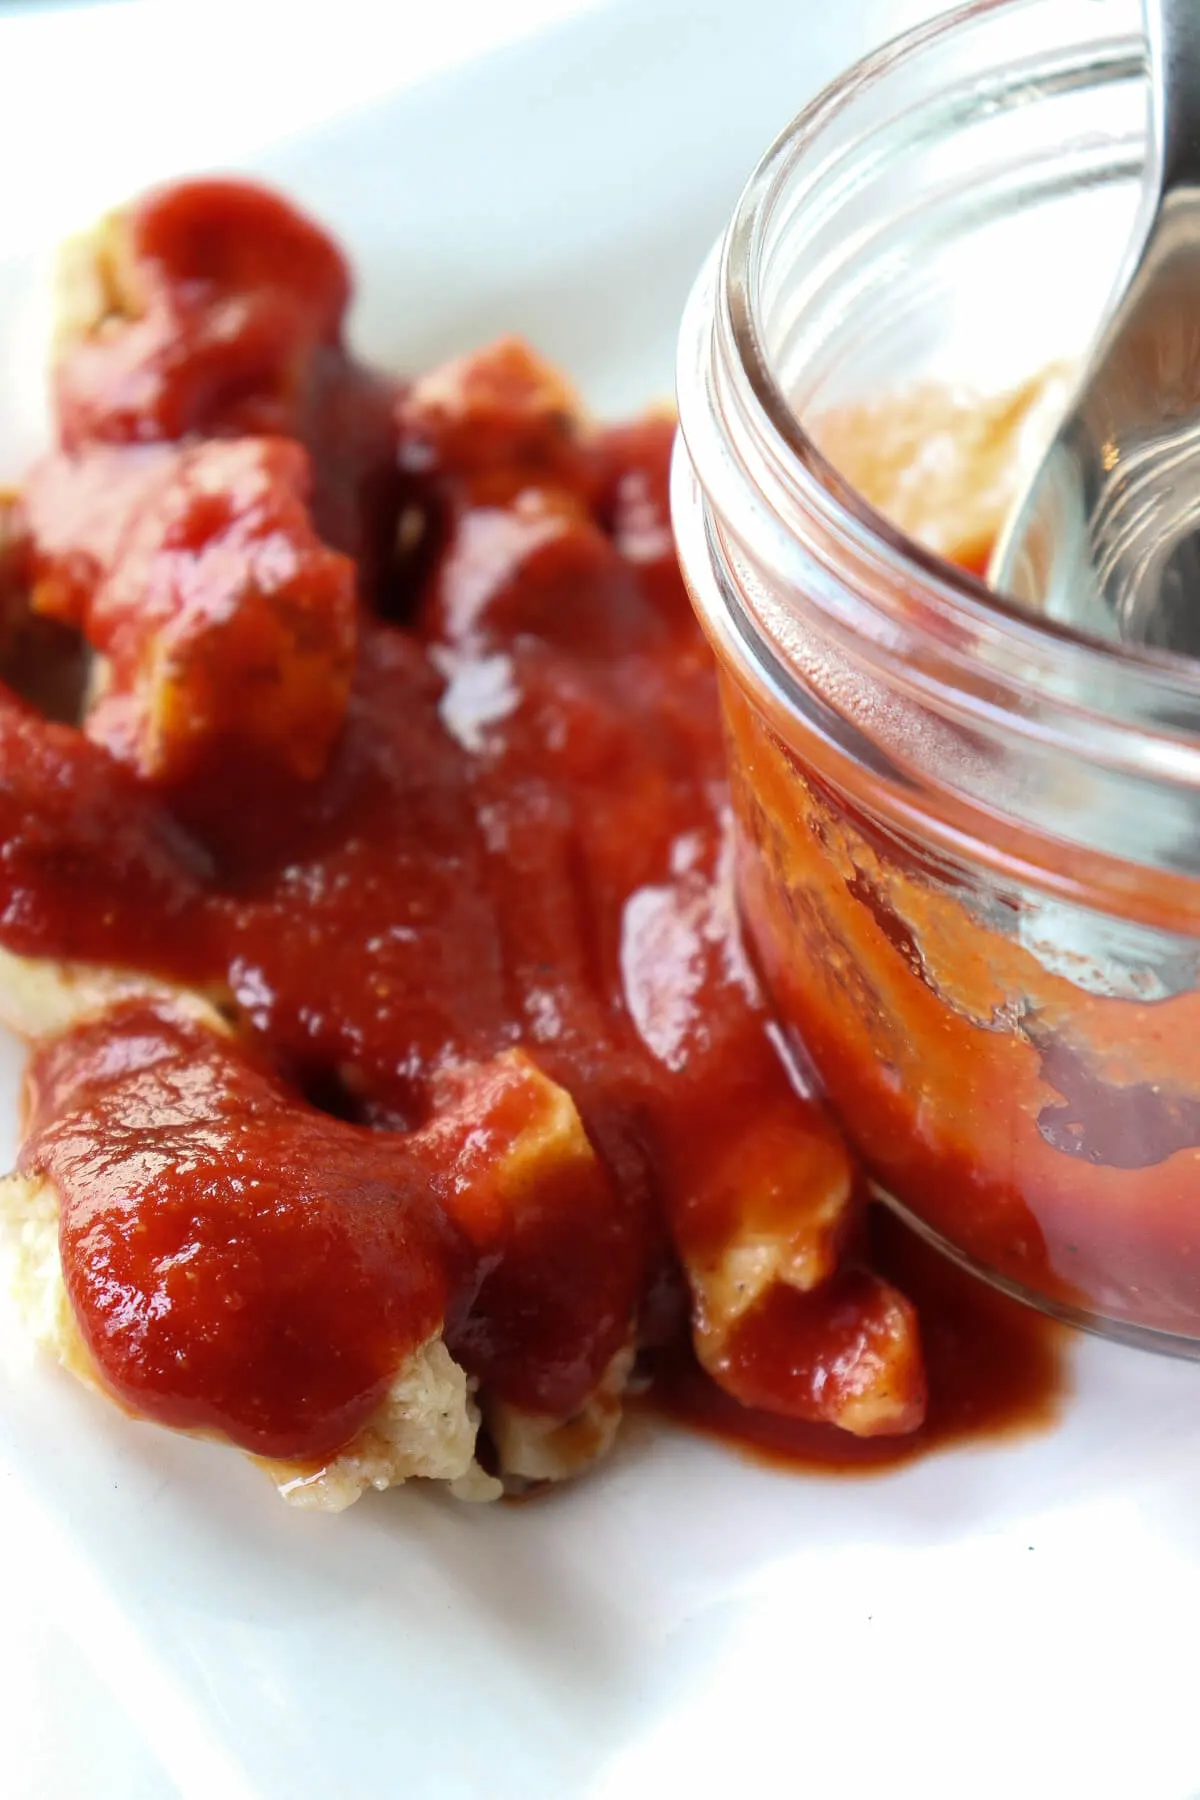 Grilled chicken smothered in sugar free BBQ sauce next to a glass jar